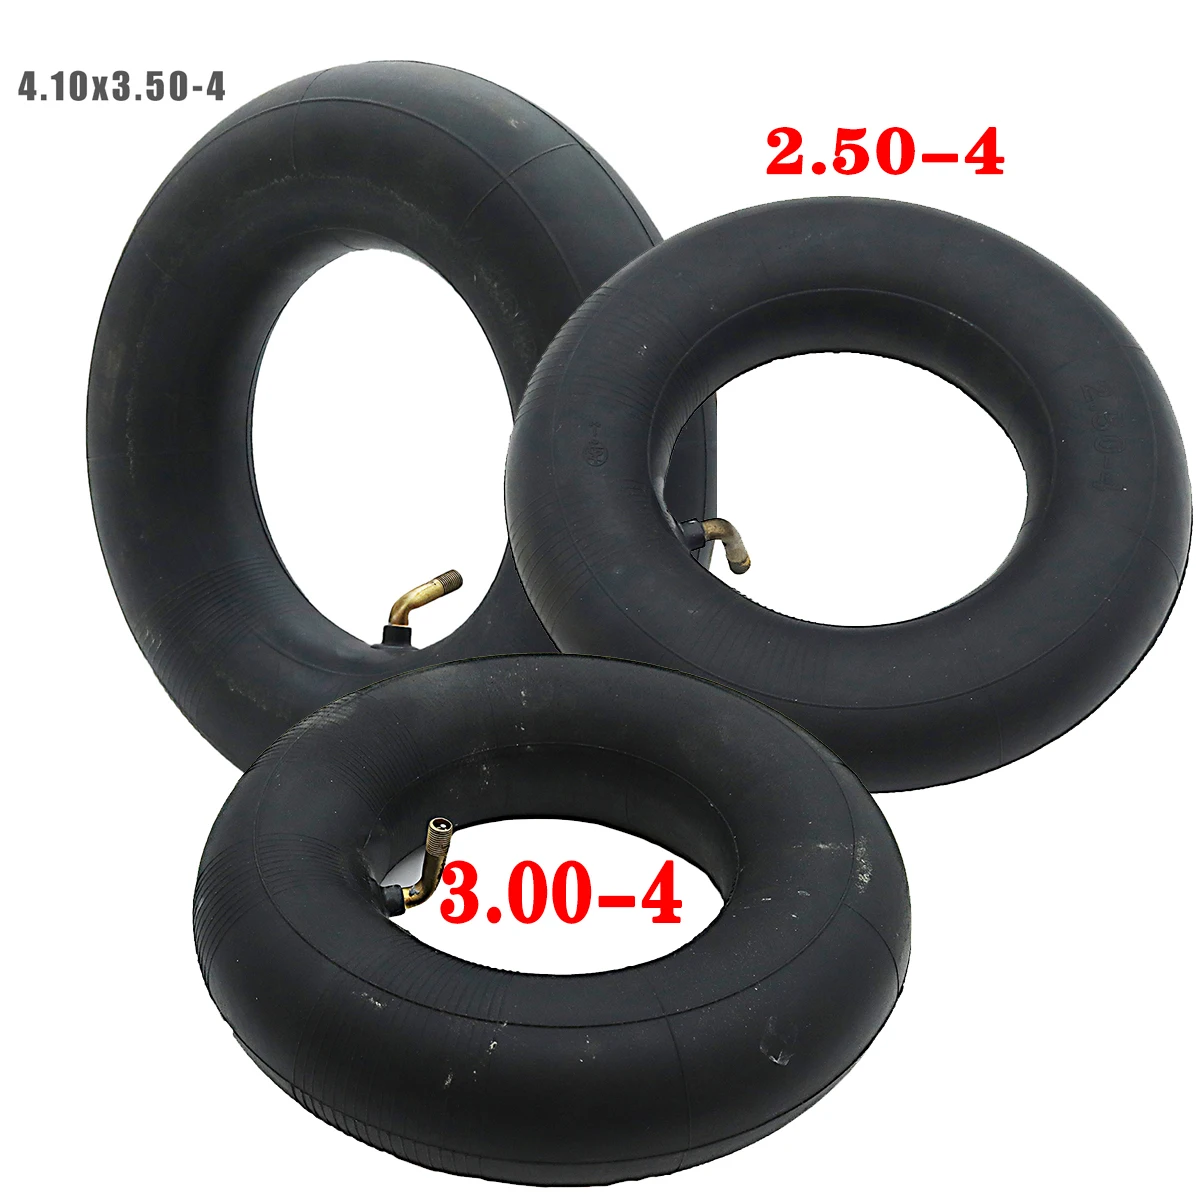 

4.10/3.50-4 Inner Tube Camera 2.80/ 2.50-4 3.00-4 Electric Scooter Accessories 9/10x350-4 Black Rubber Inner Tube 265x80